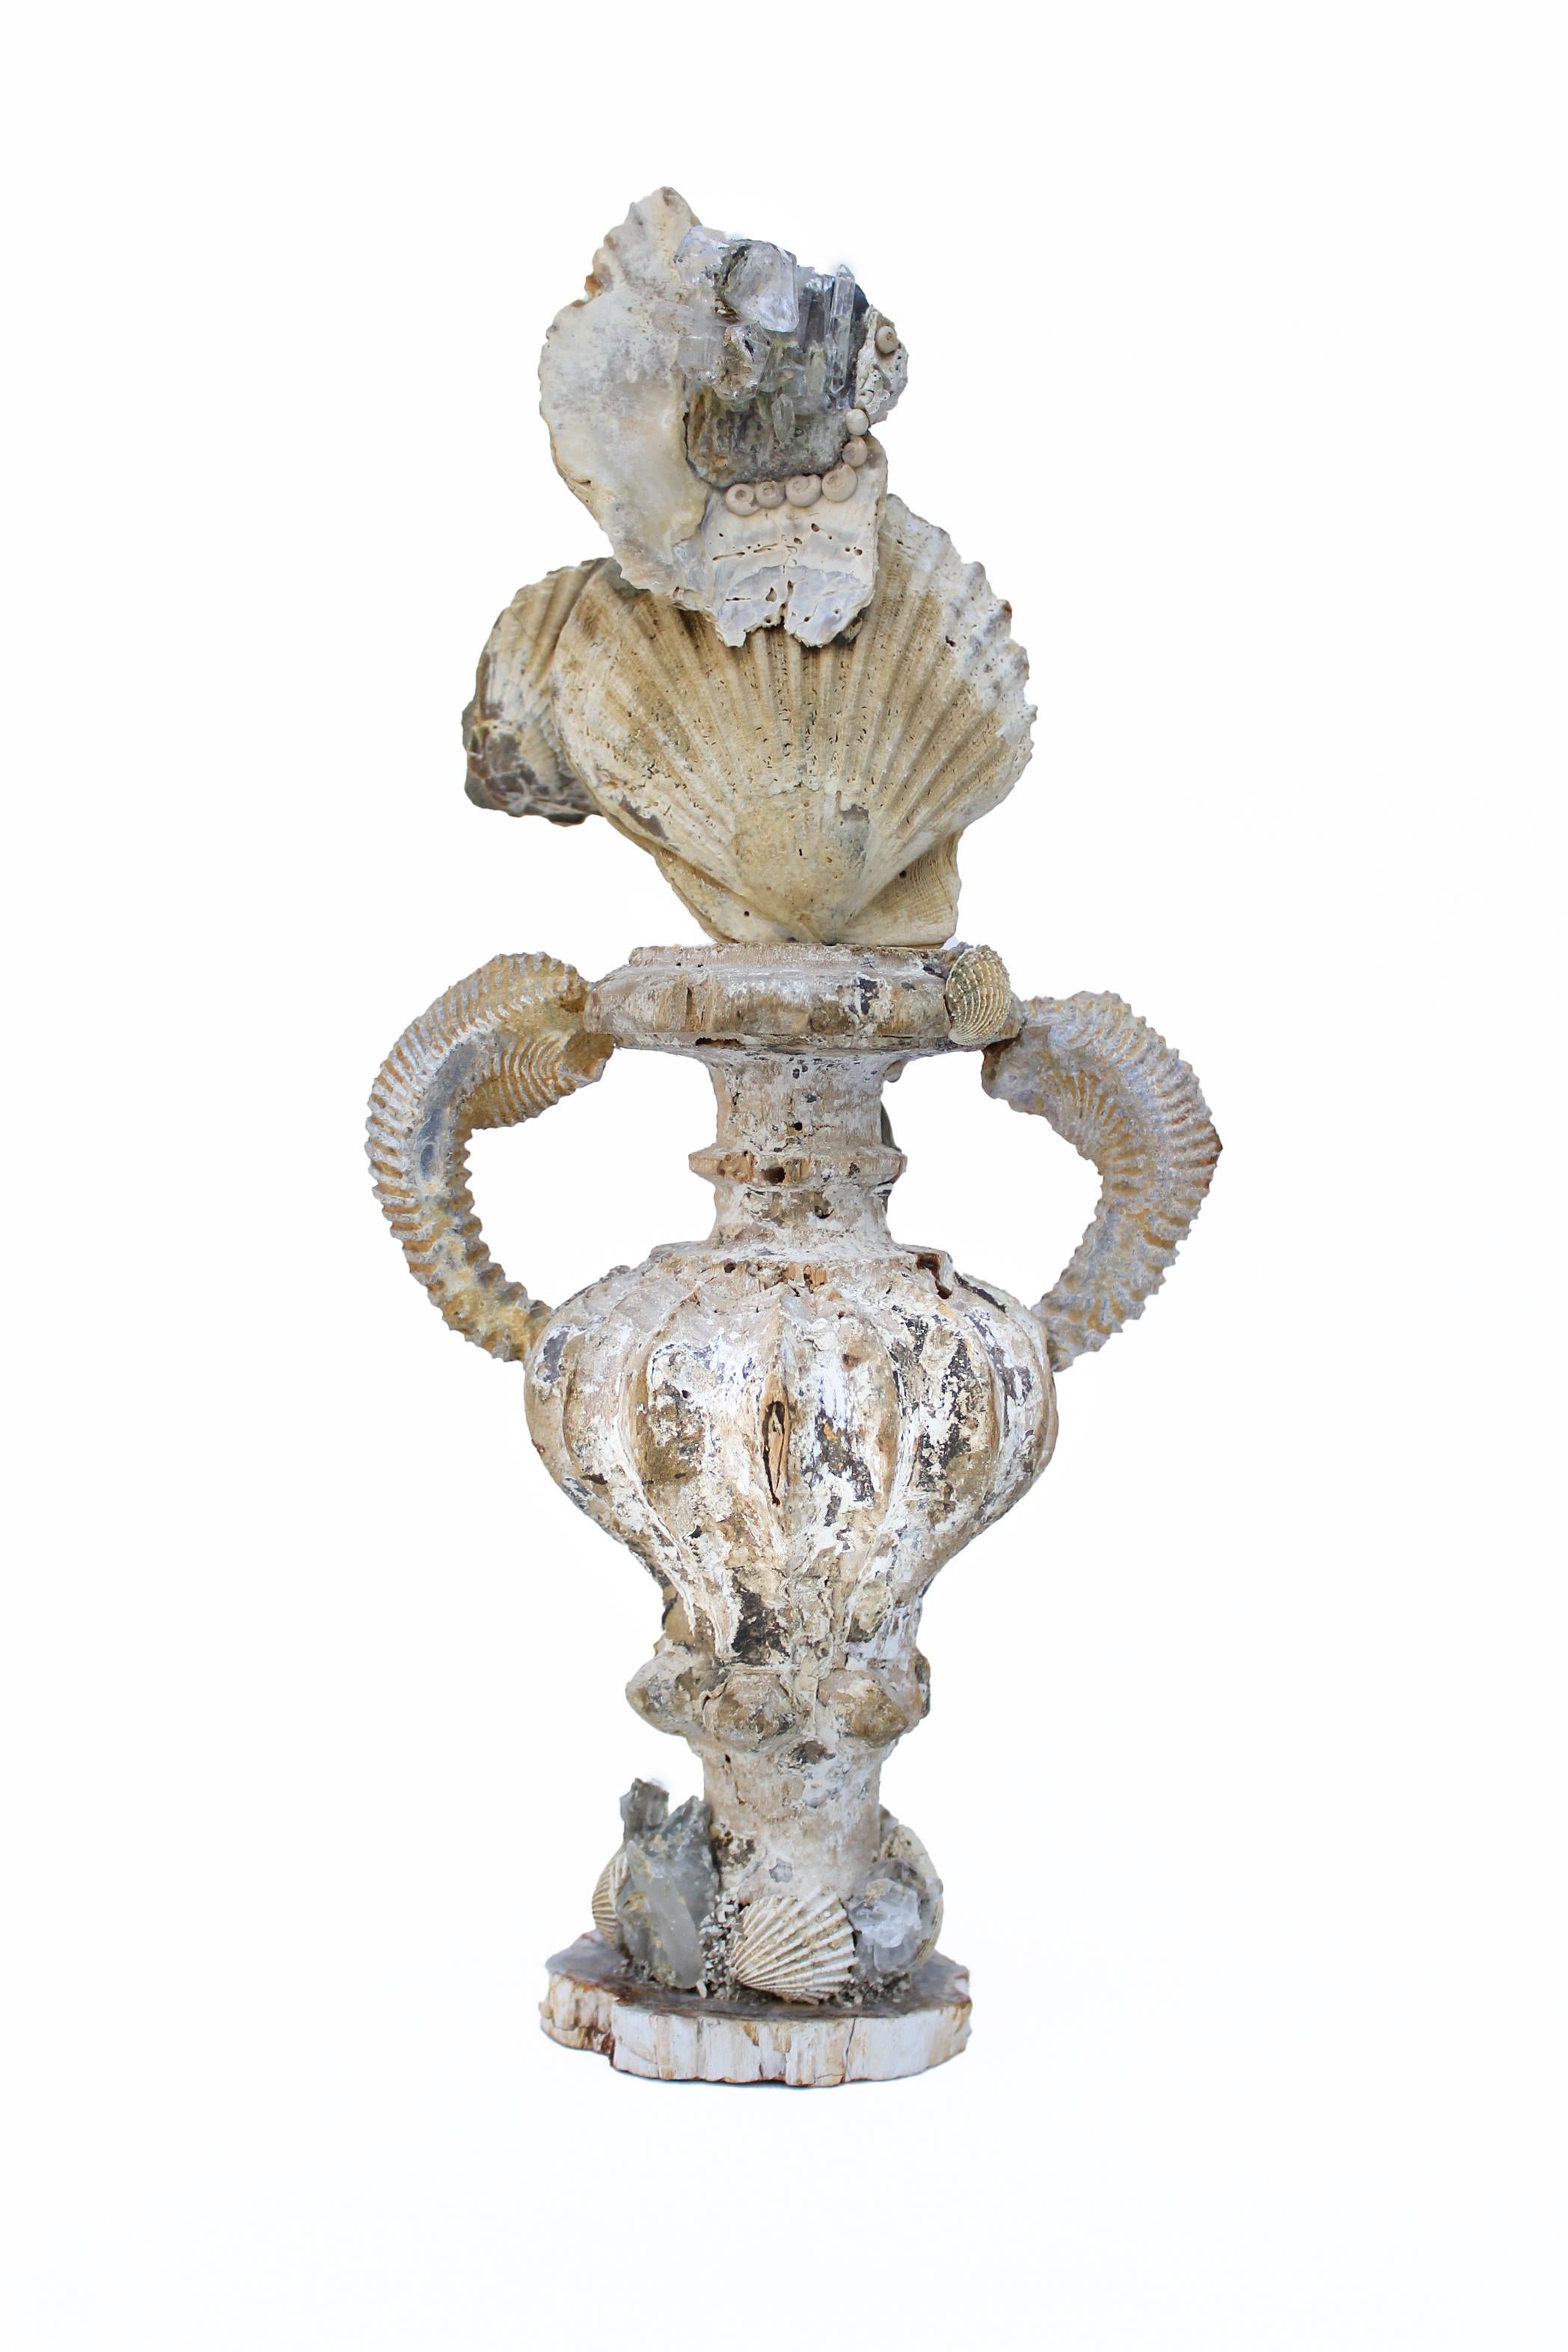 17th or 18th century Italian fragment vase with chesapecten shells, zig zag oyster fossil arms, fossil shells, and a faden crystals on a polished petrified wood base.

This fragment is from a church in Florence. It was found and saved from the